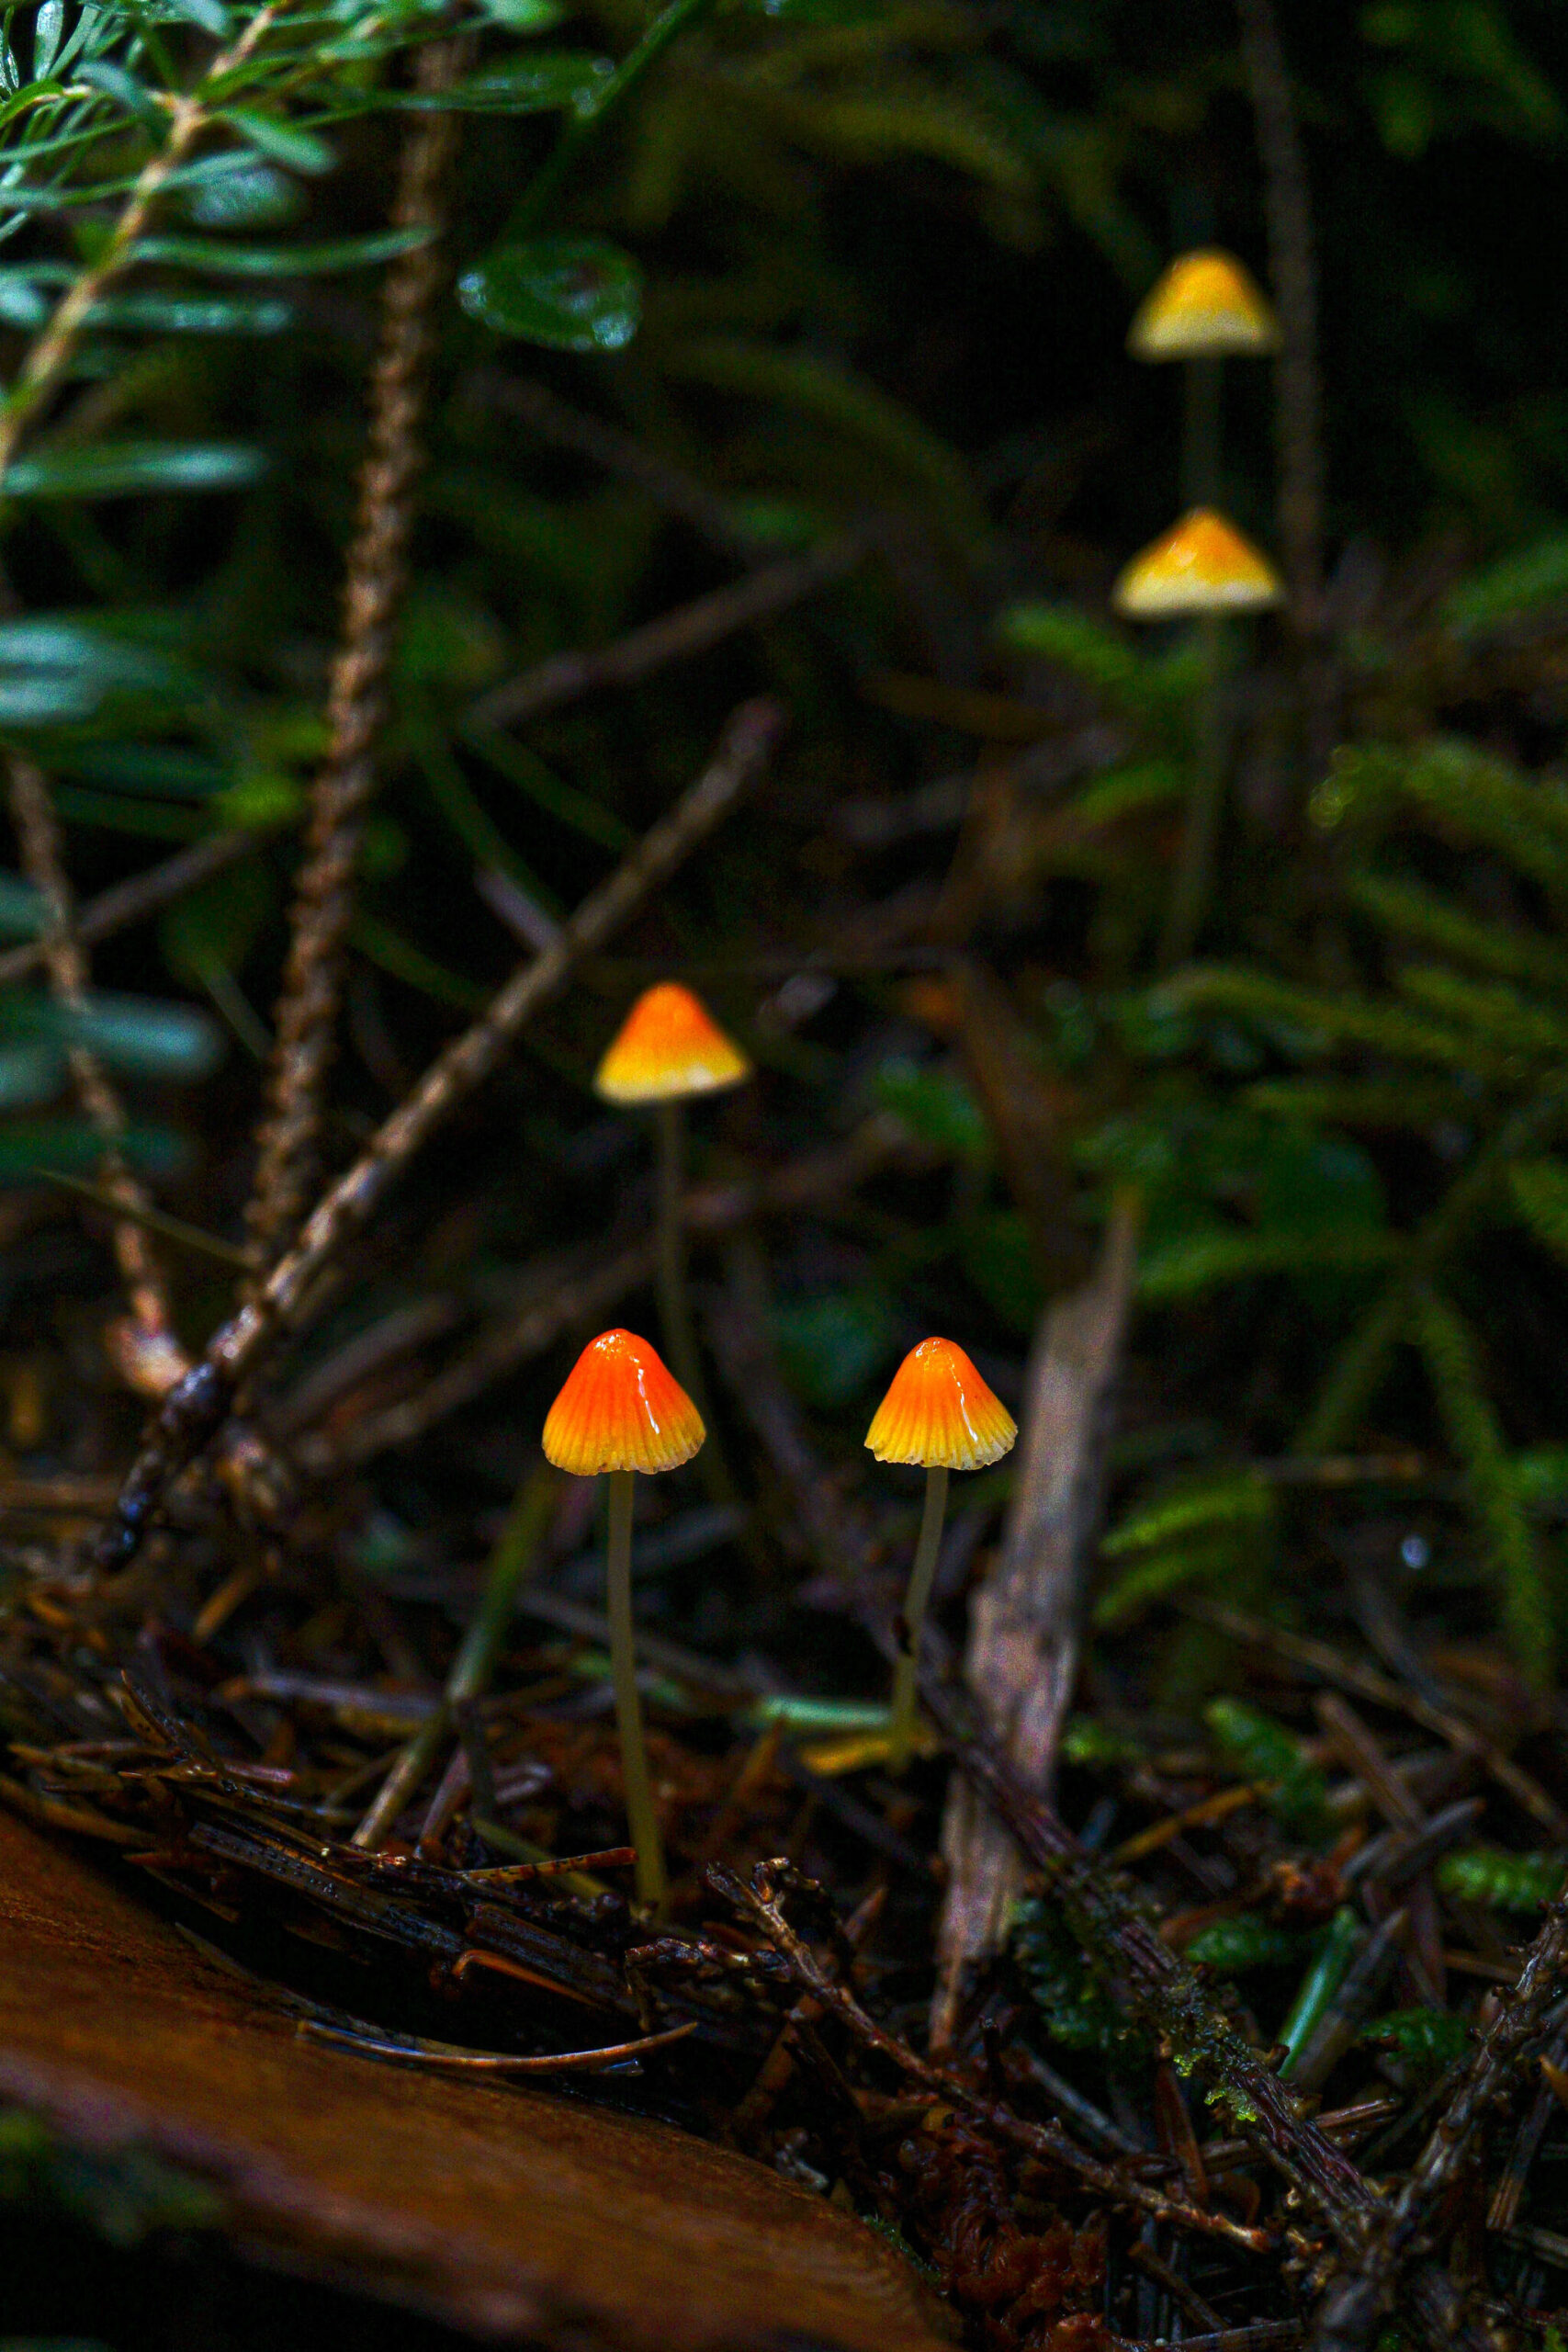 Small mushrooms resembling candy corn on Prince of Wales Island on Oct 15. (Photo by Marti Crutcher)